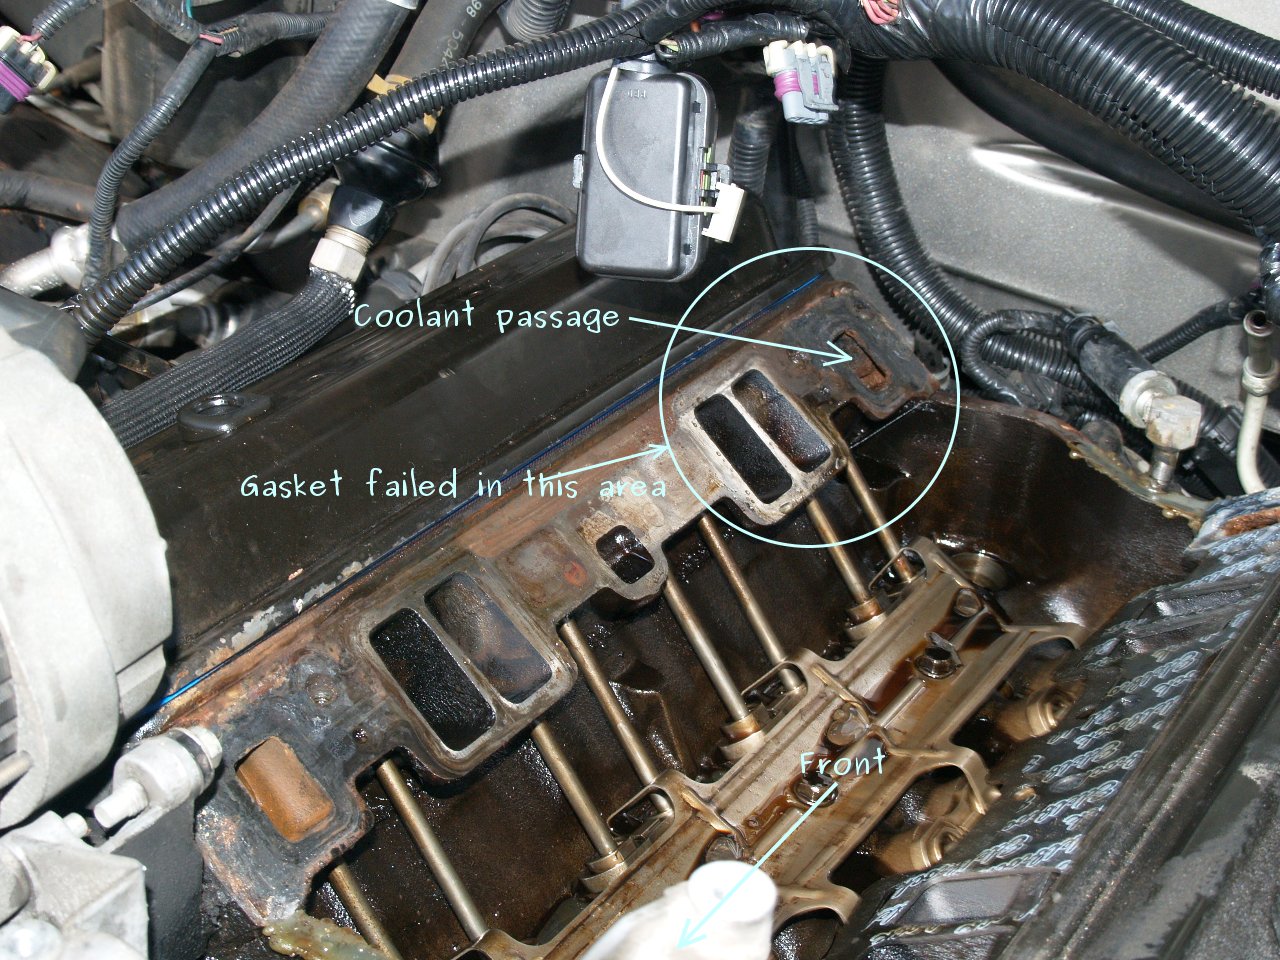 See P08B6 in engine